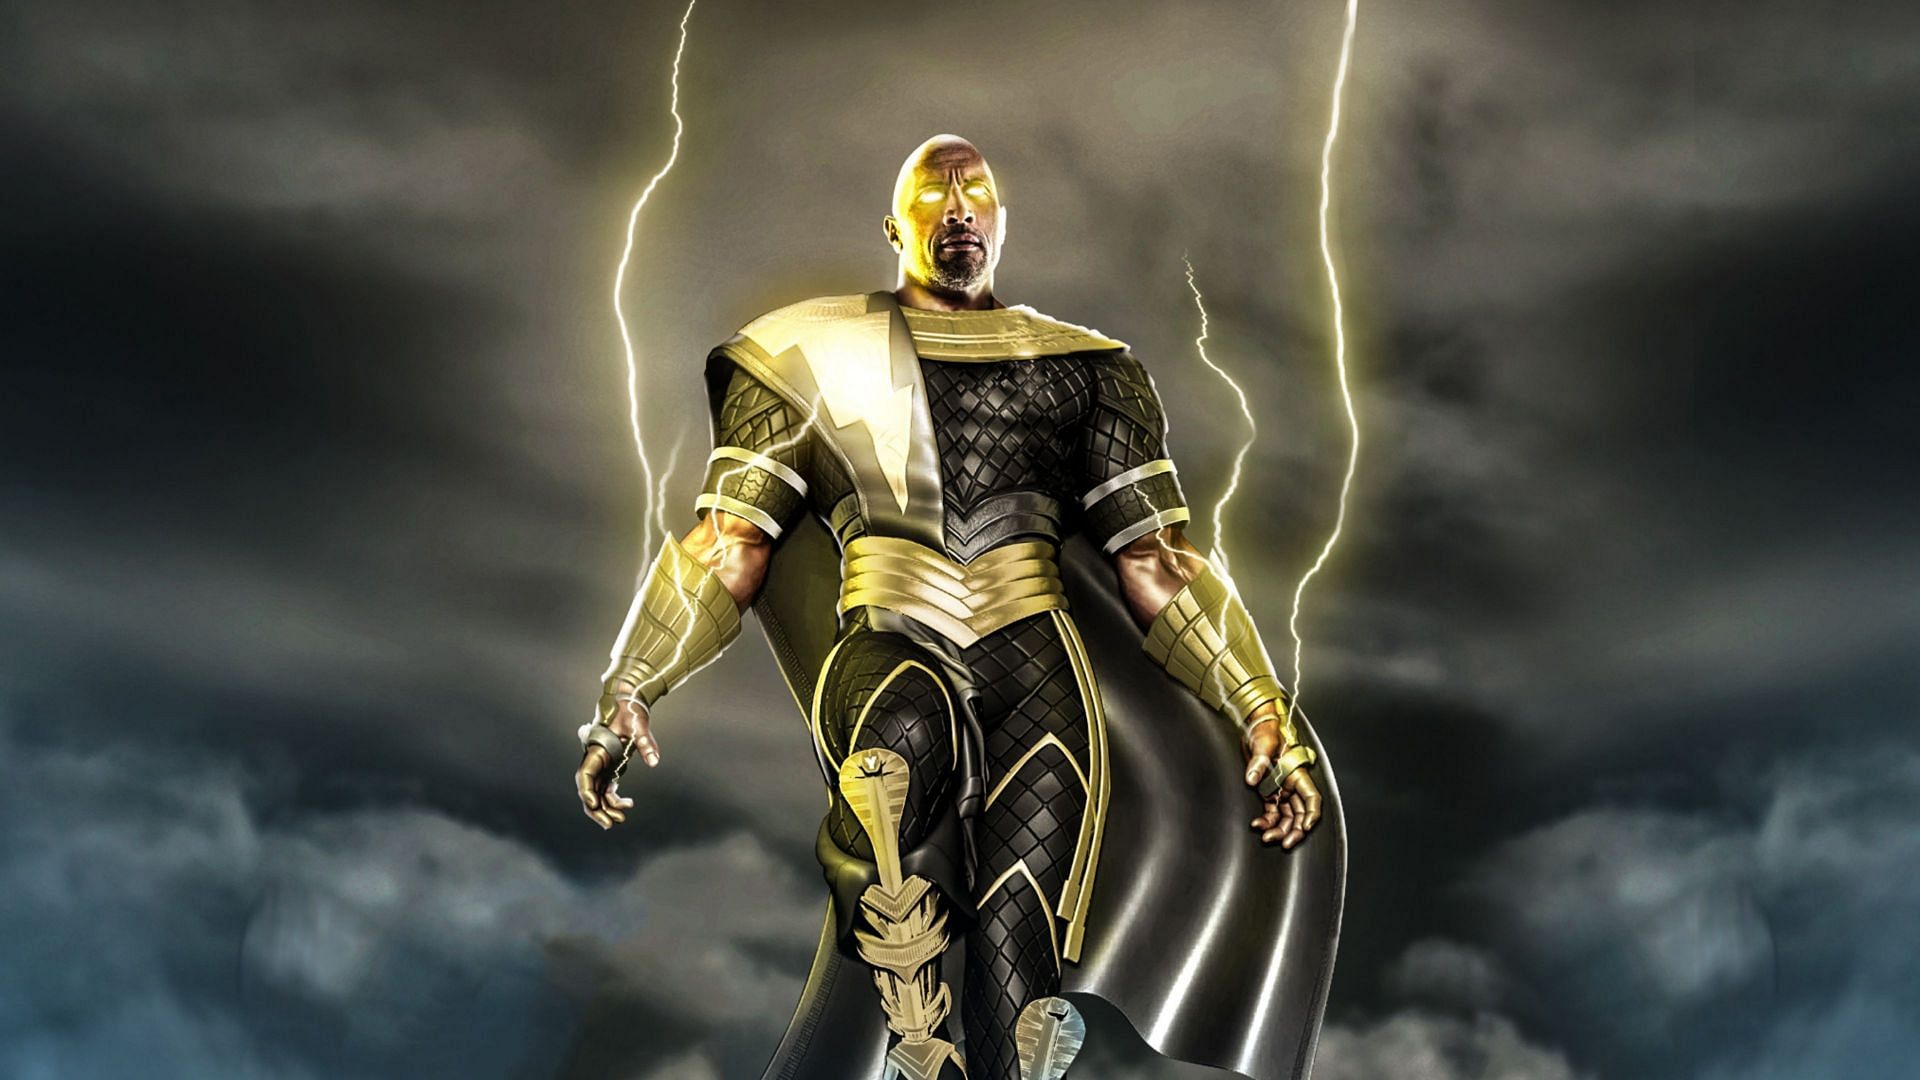 Black Adam is a highly skilled combatant and absurdly powerful being. (Image Via Sportskeeda)